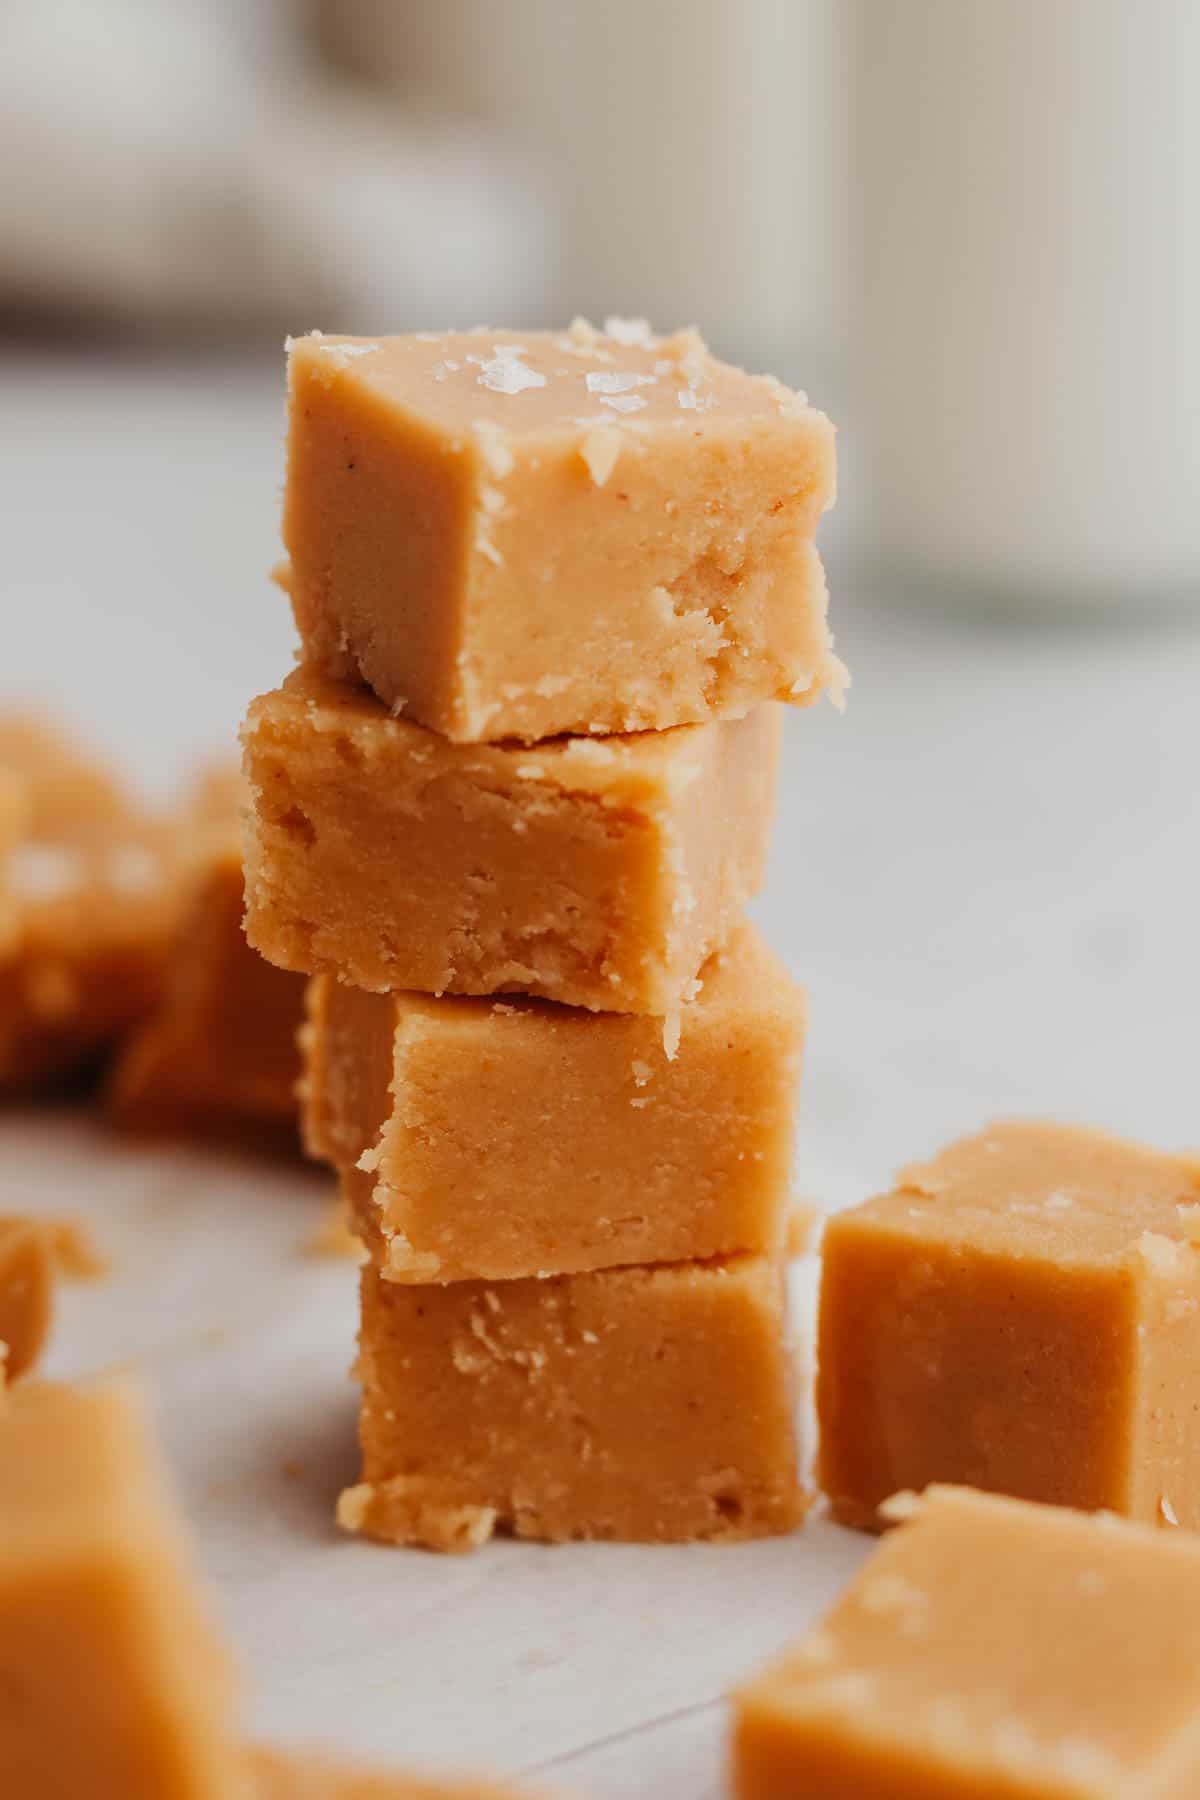 A stack of 4 pieces of no bake peanut butter fudge.